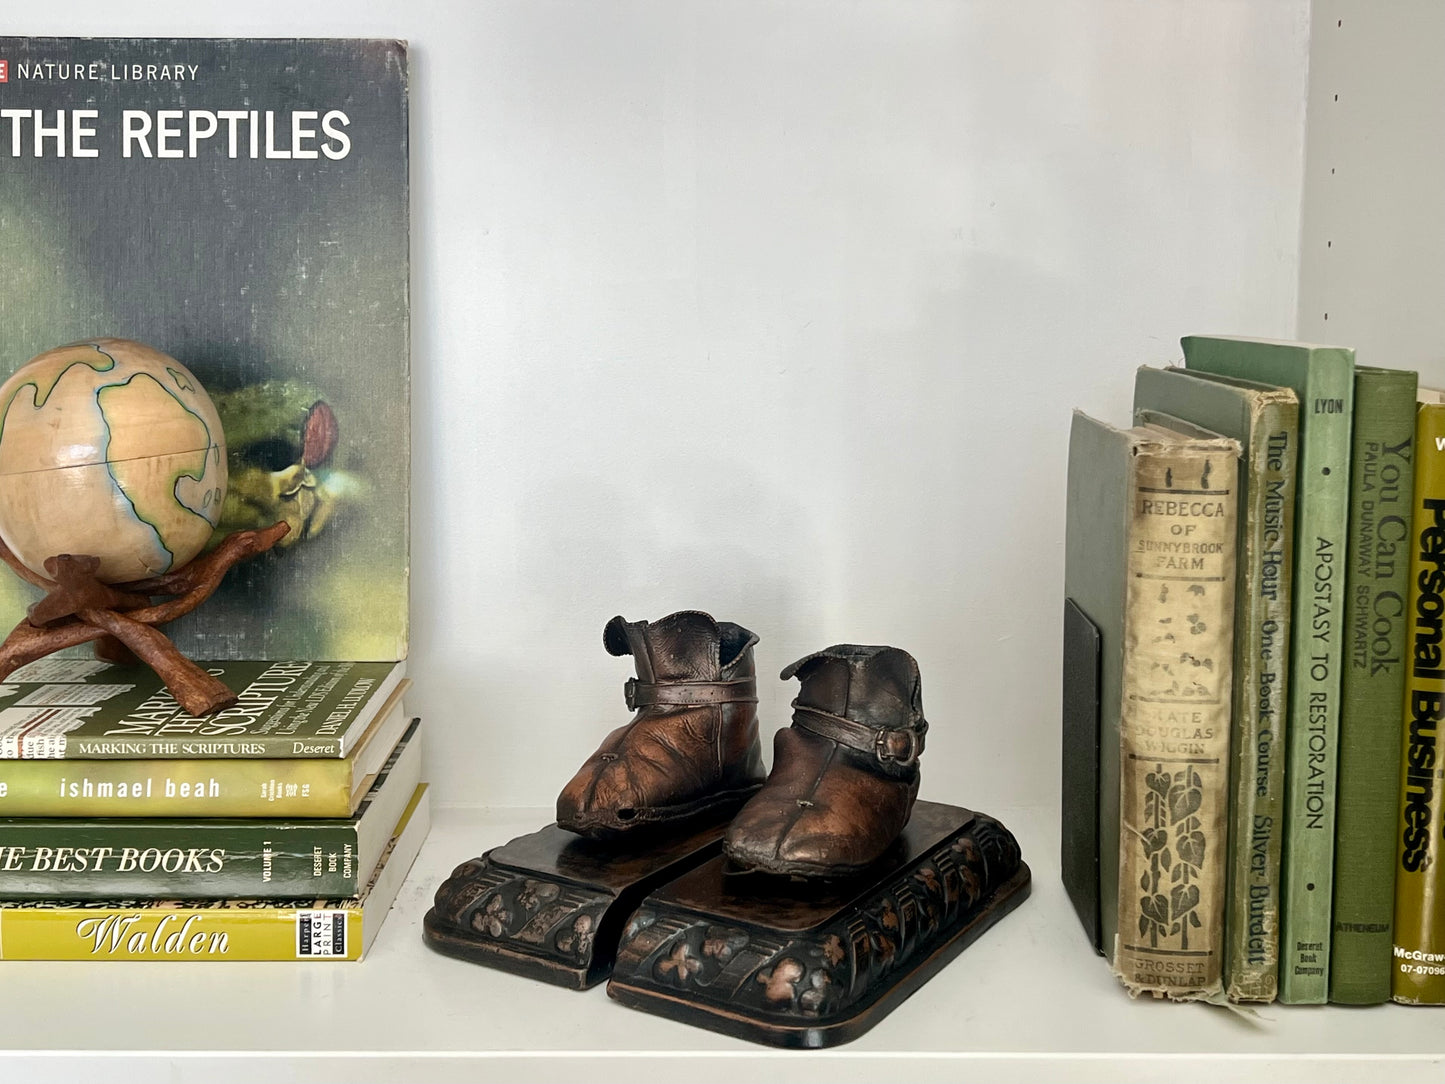 Vintage Bronzed Baby Shoes Book Ends